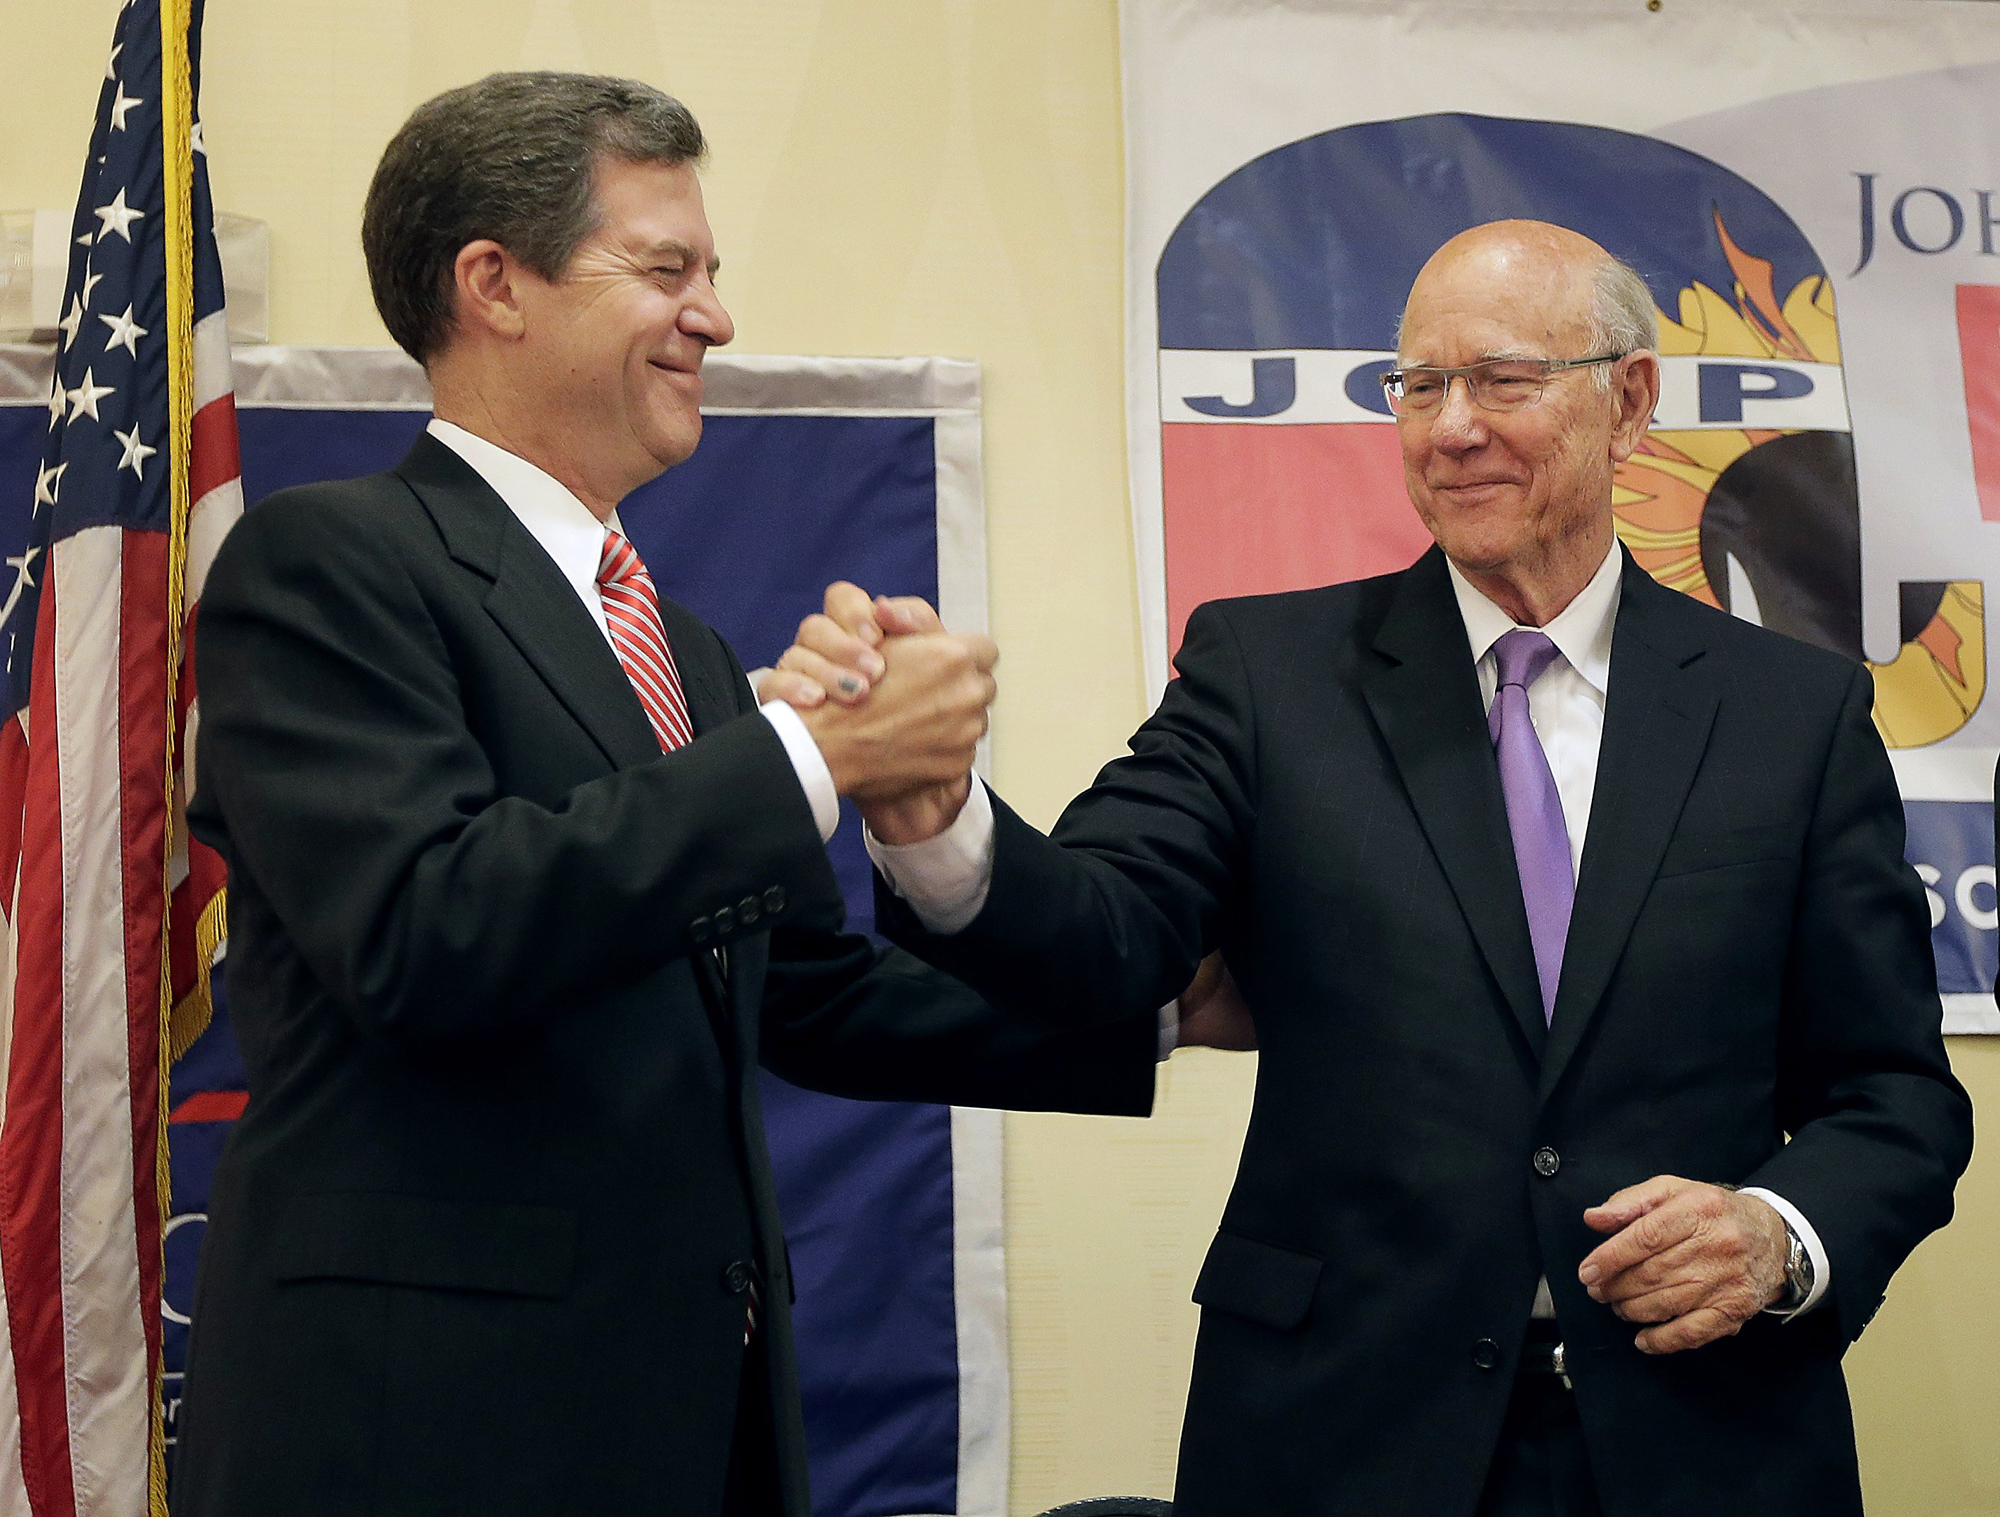 Kansas Gov. Sam Brownback, left, and U.S. Sen. Pat Roberts greet each other at Johnson County Republican's election watch party, Aug. 5, 2014, in Overland Park, Kan. (Charlie Riedel—AP)